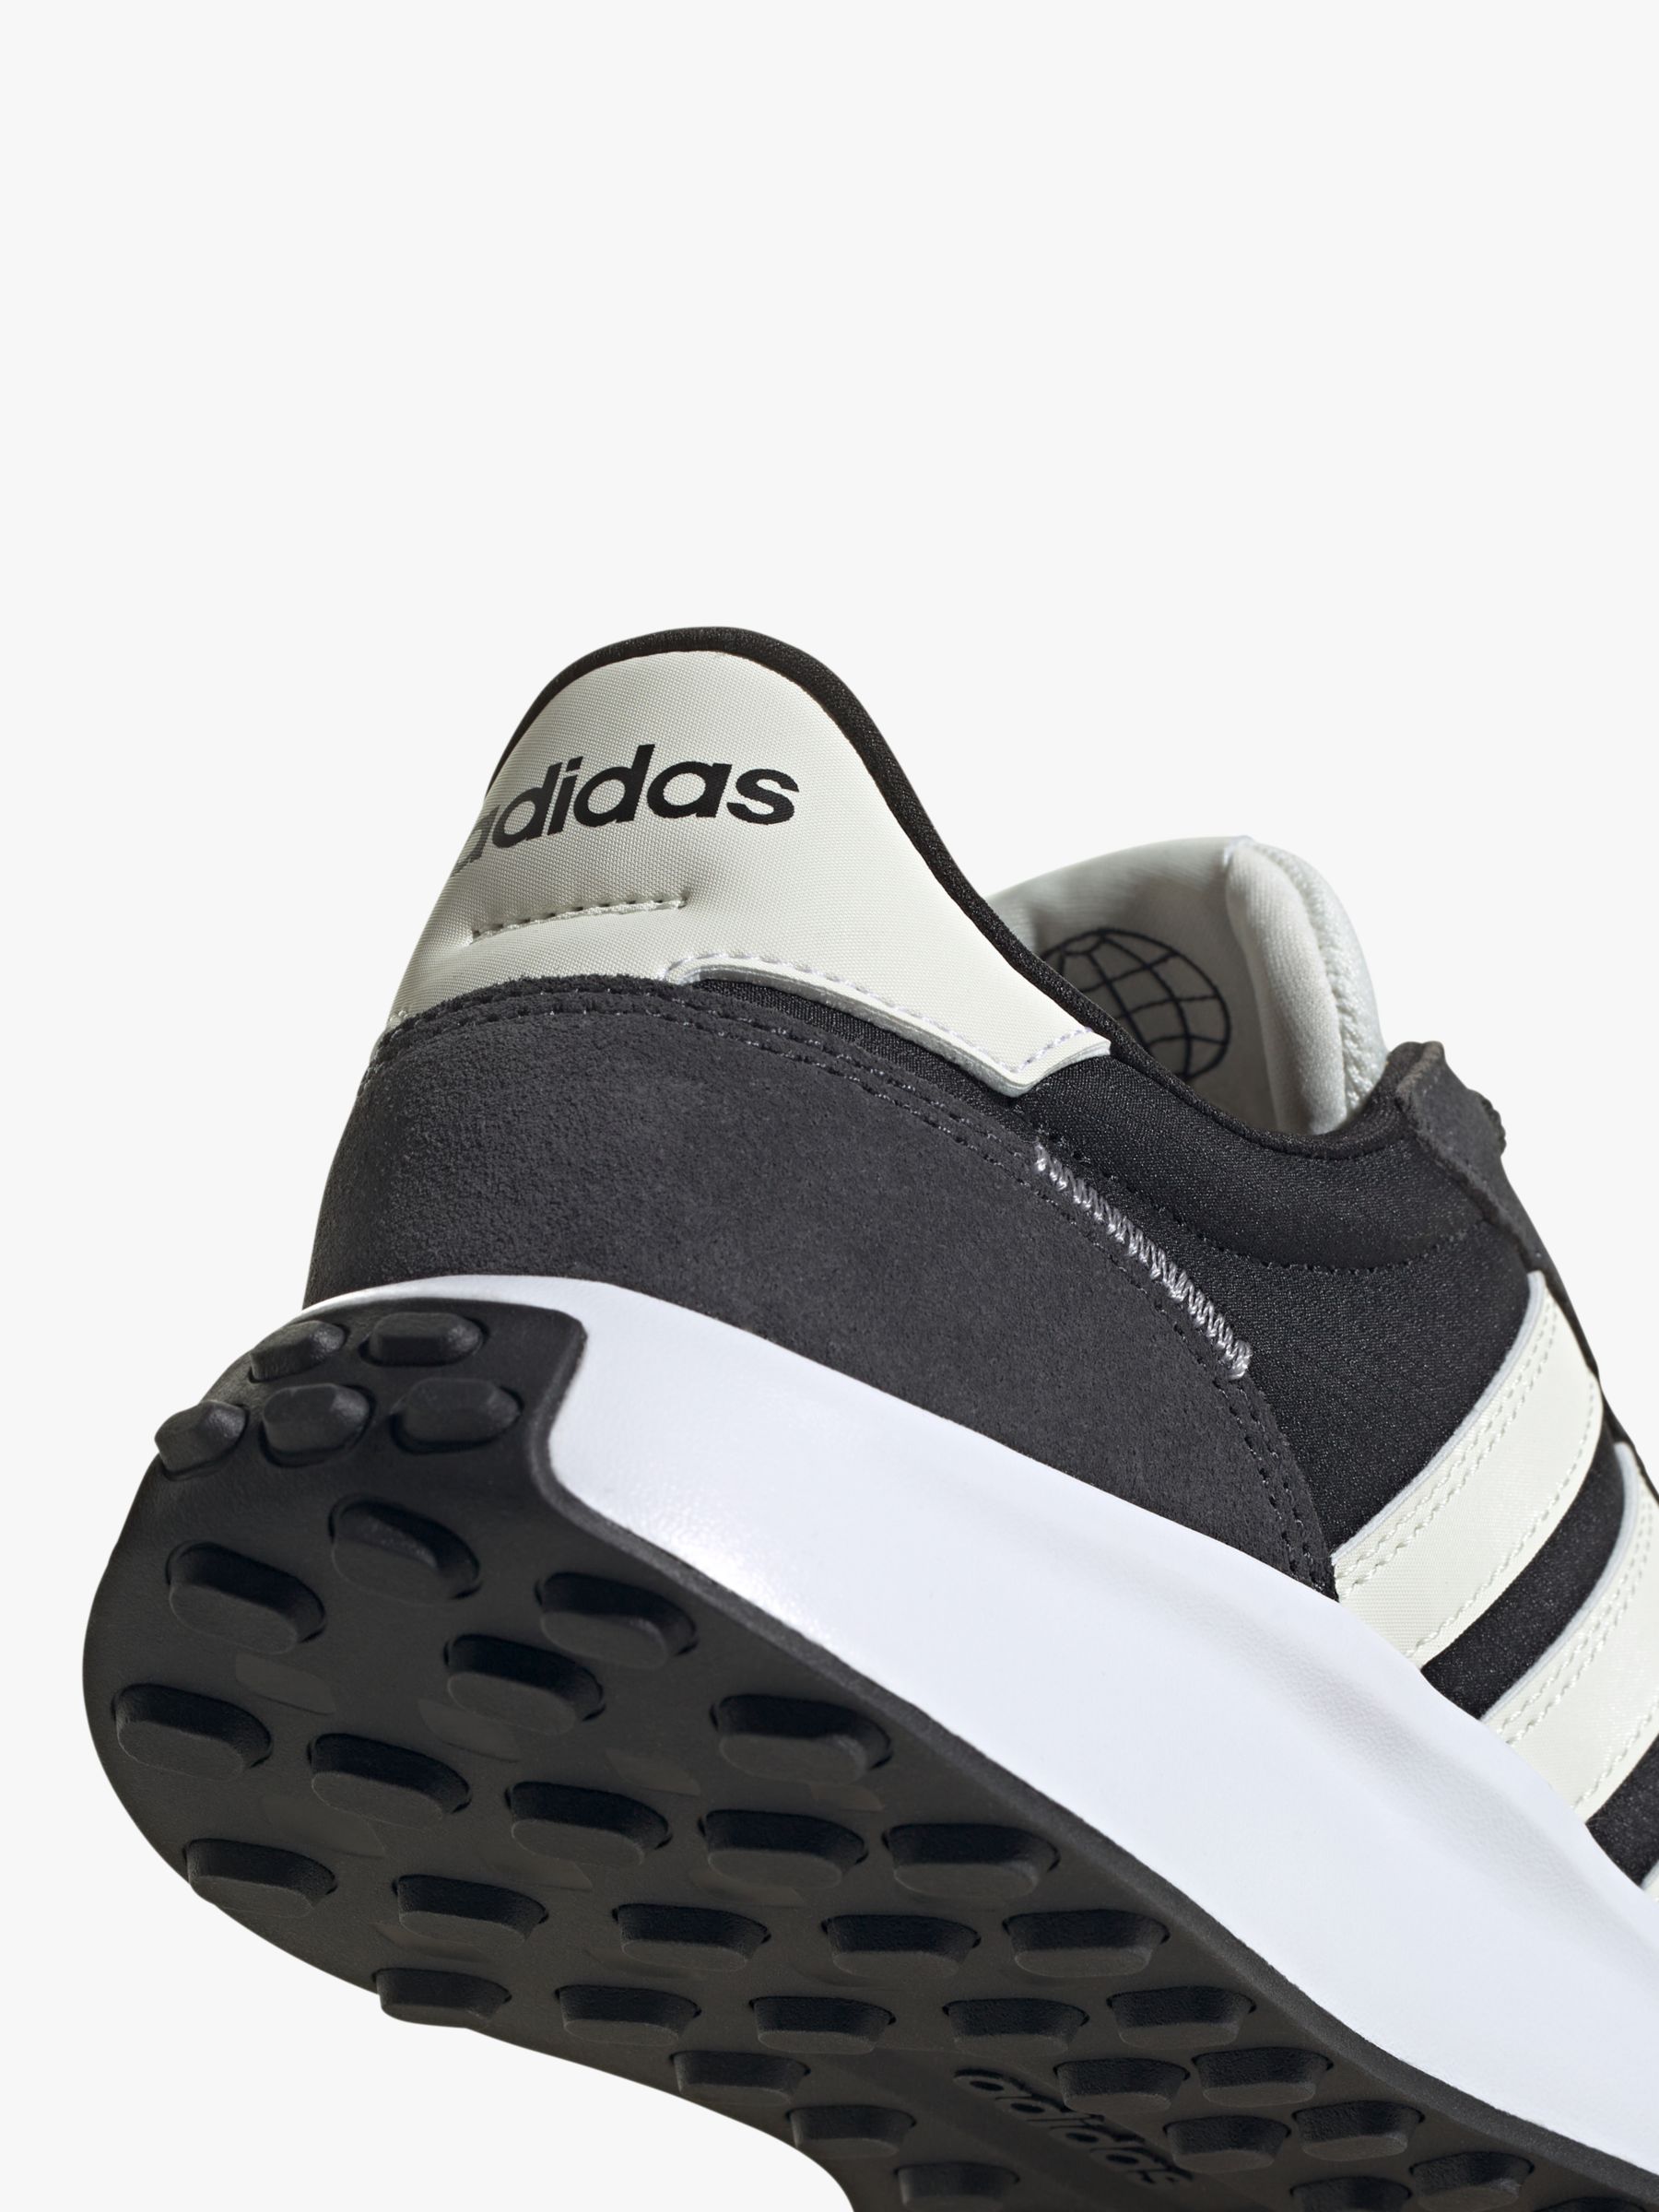 Buy adidas Run 70s Trainers, Black/white Online at johnlewis.com